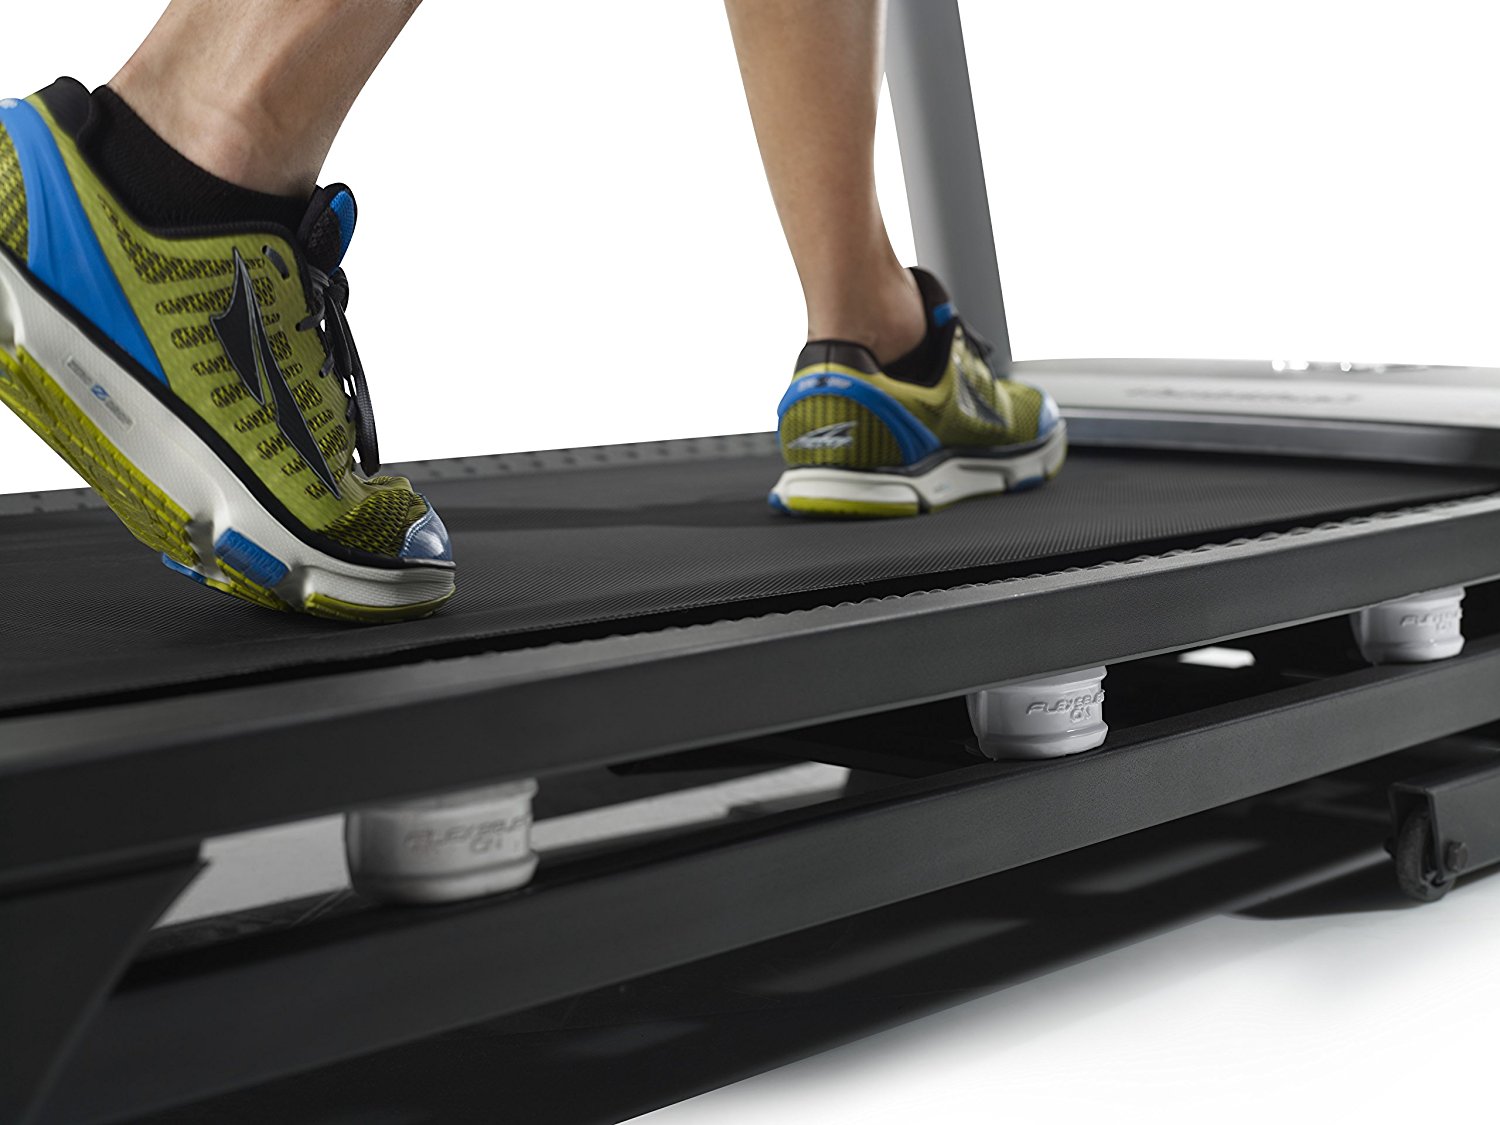 Today only: Save up to 37% on NordicTrack fitness equipment